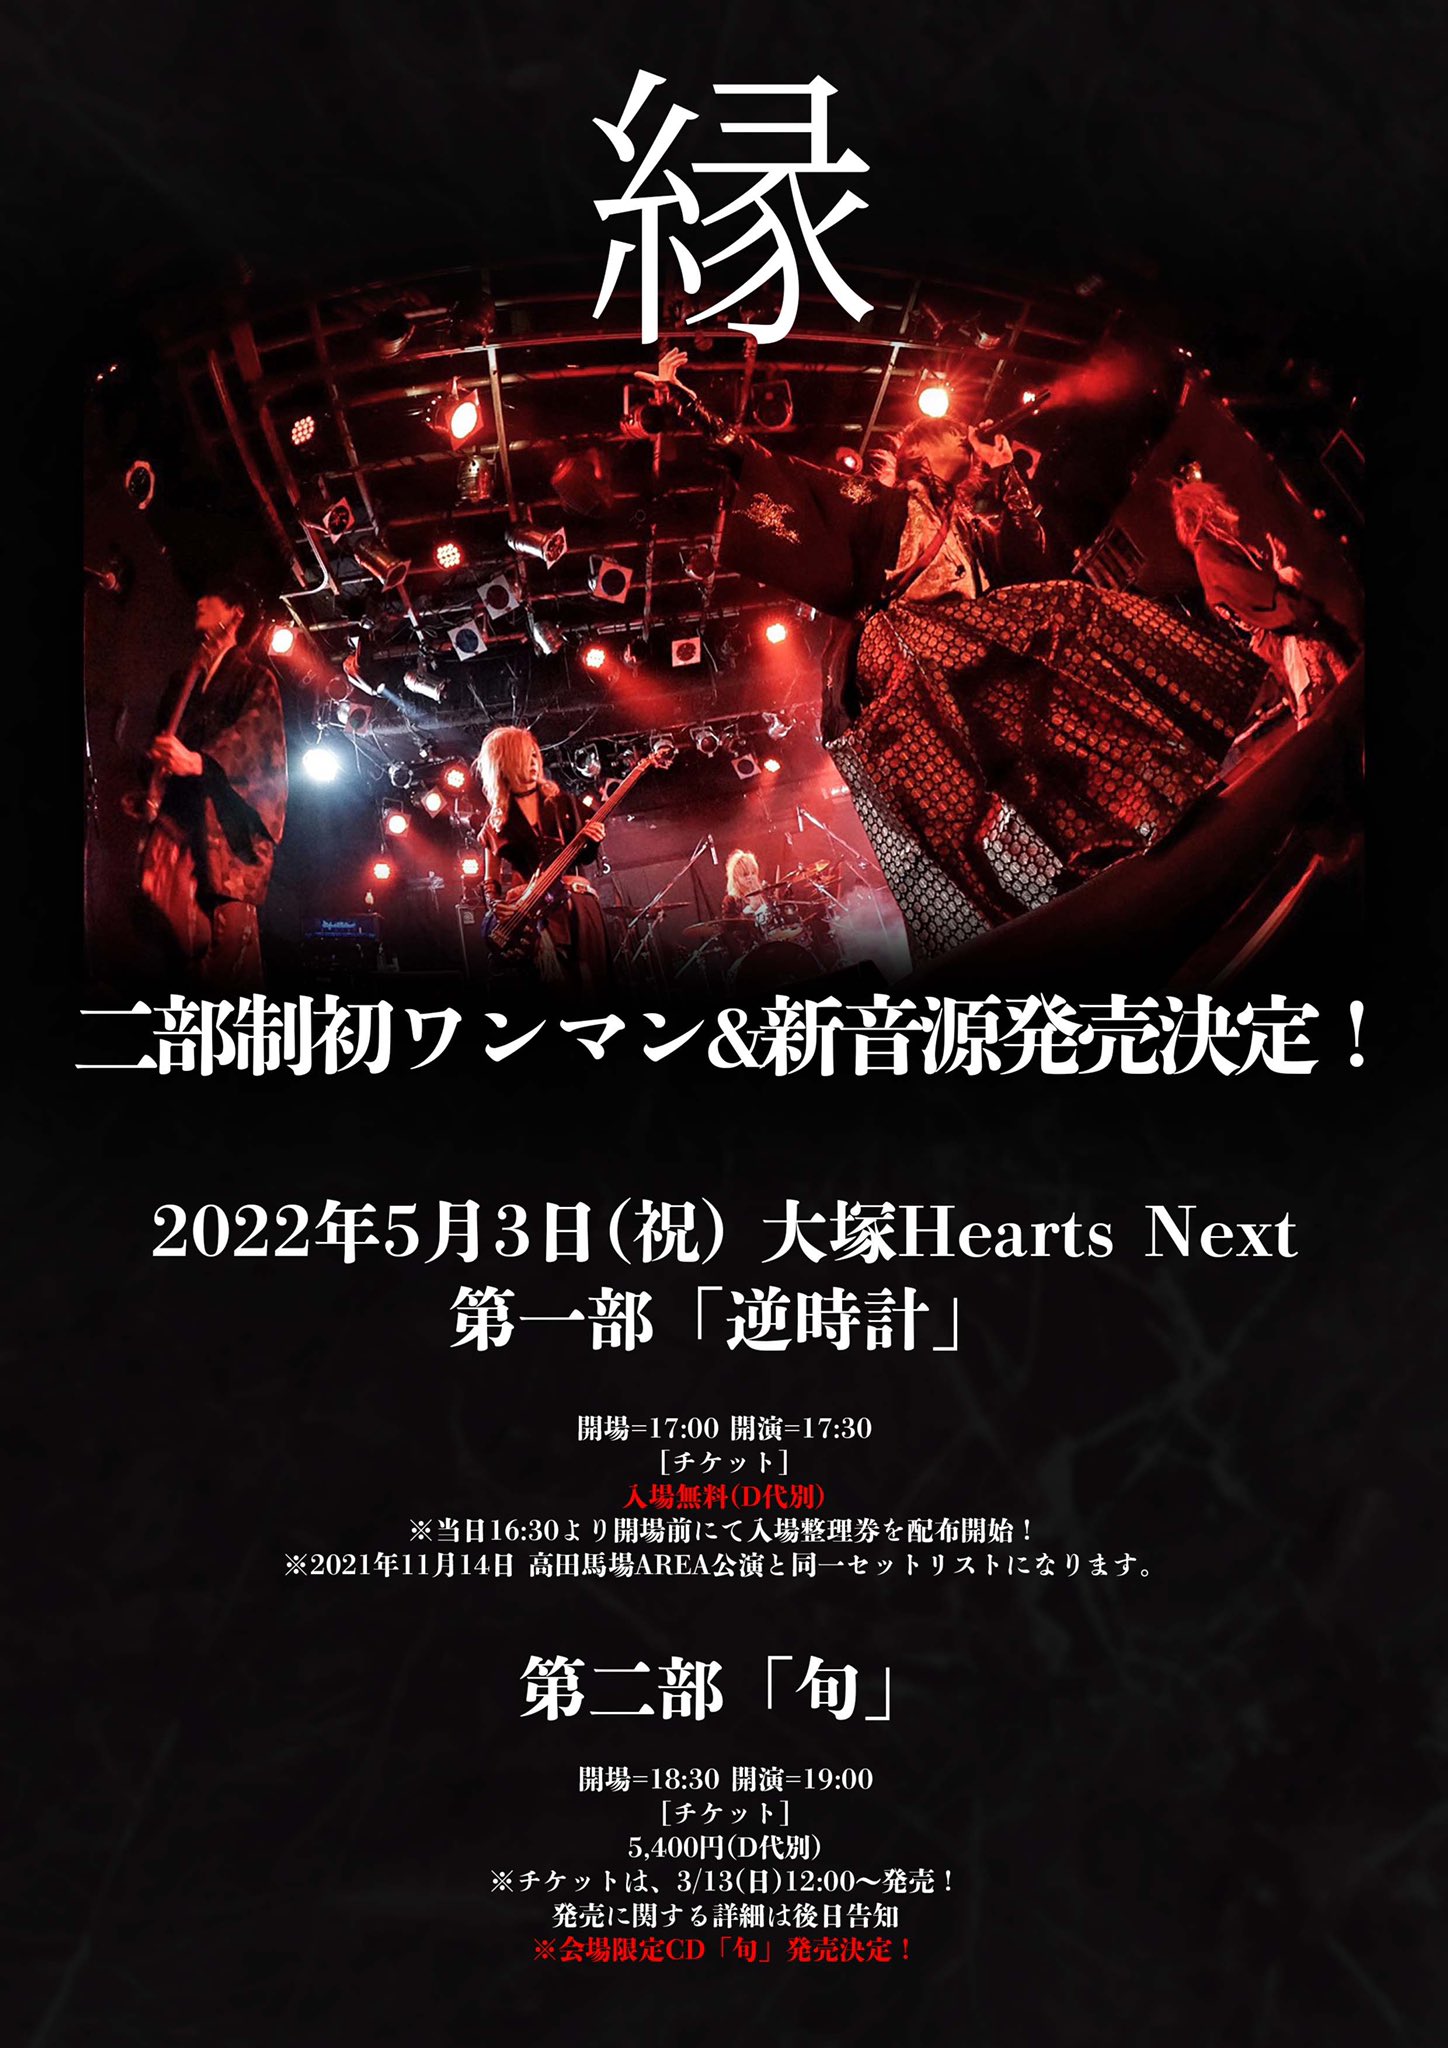 Poster for the 2nd live show of 縁 (Enishi) in May 2022